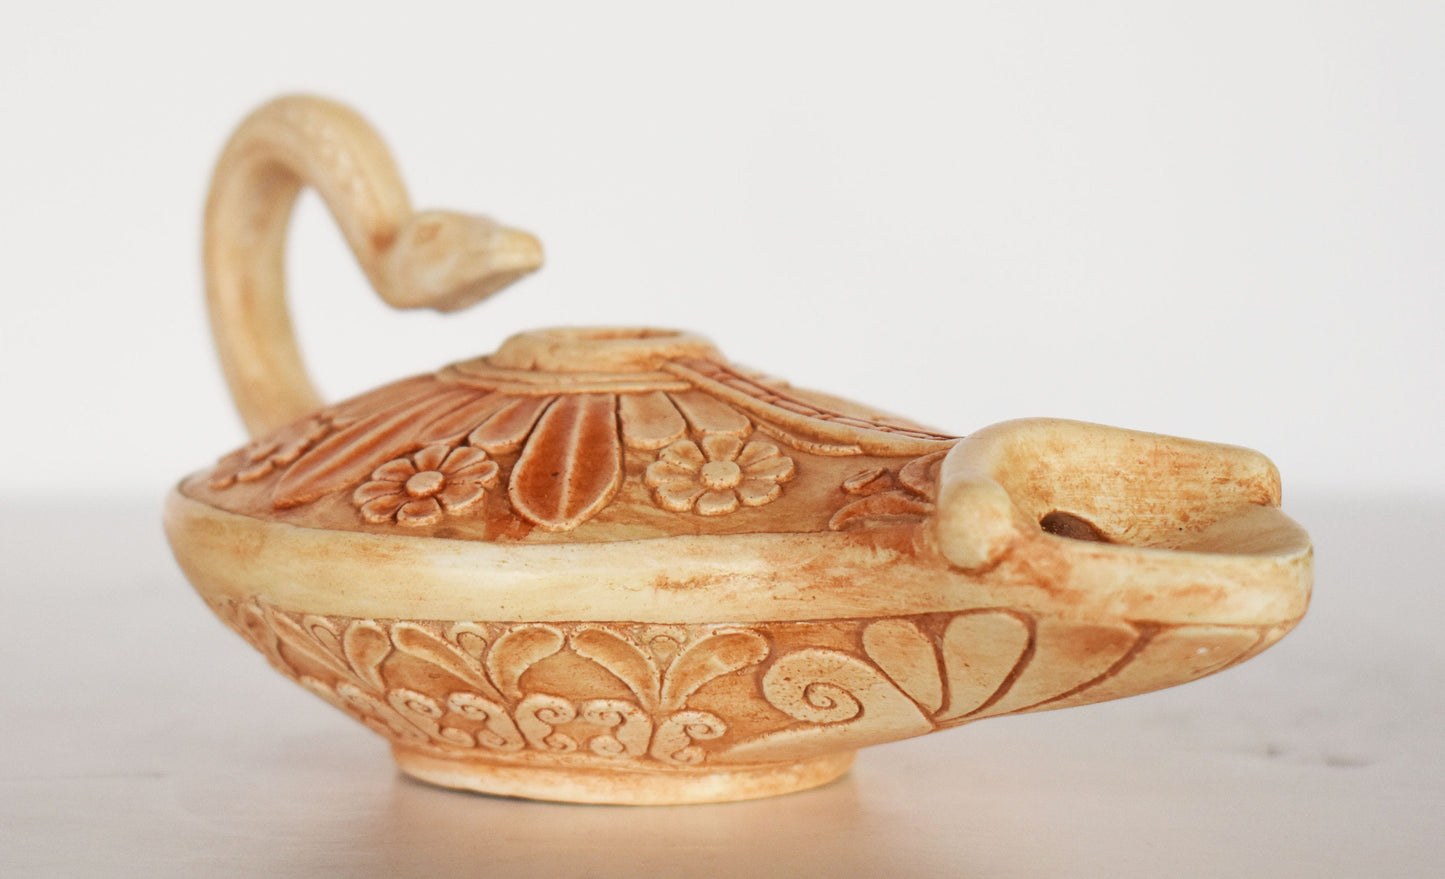 Oil Lamp -  Snake and Floral Design - Museum Reproduction - Ceramic Artifact